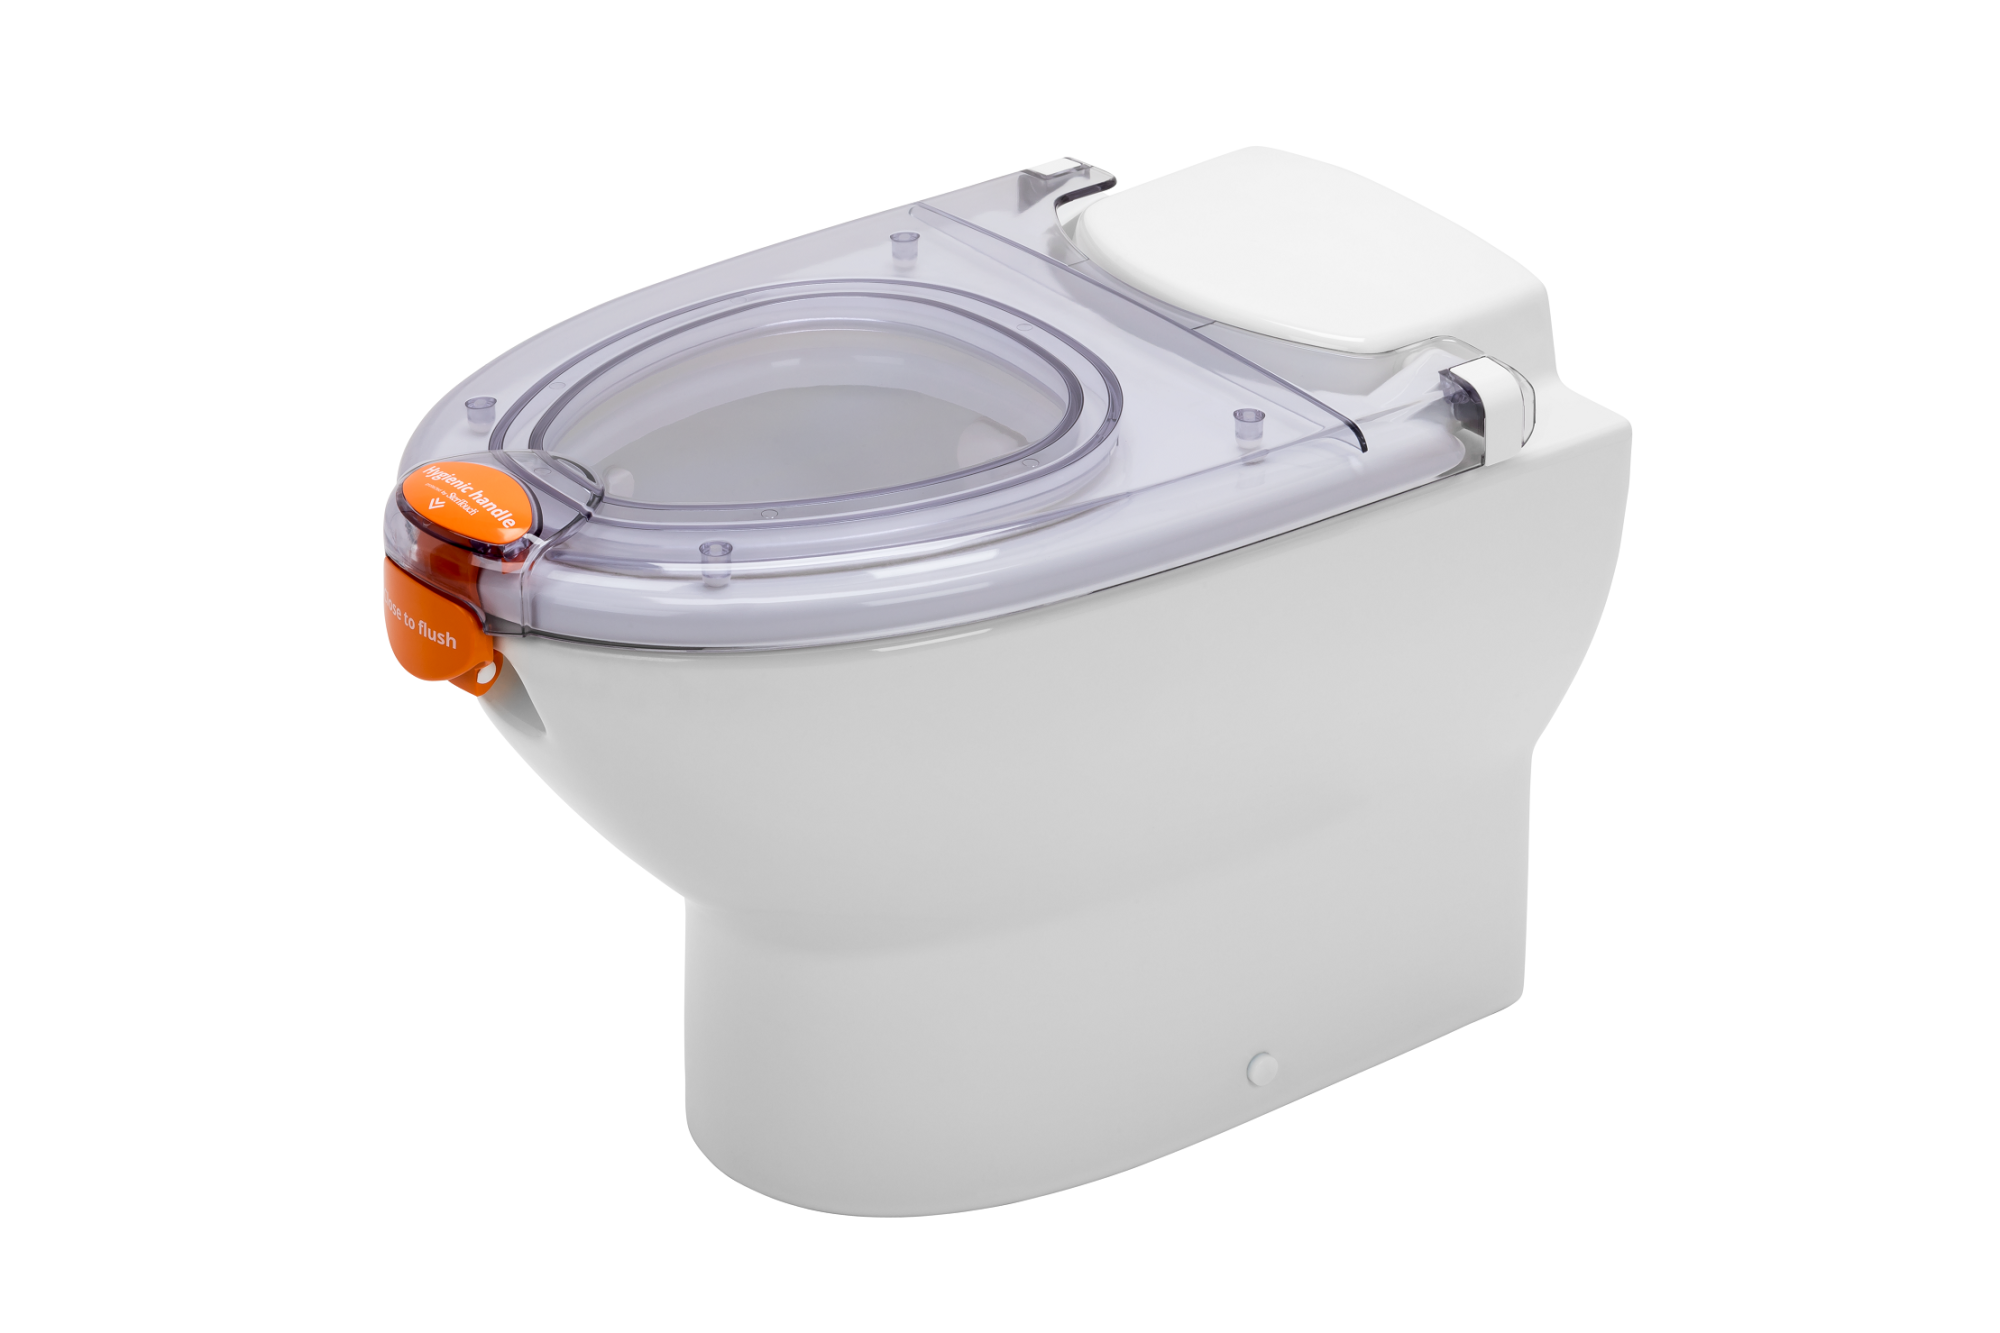 High-Performance Toilet Manufacturer Launches £3.2M Funding Campaign